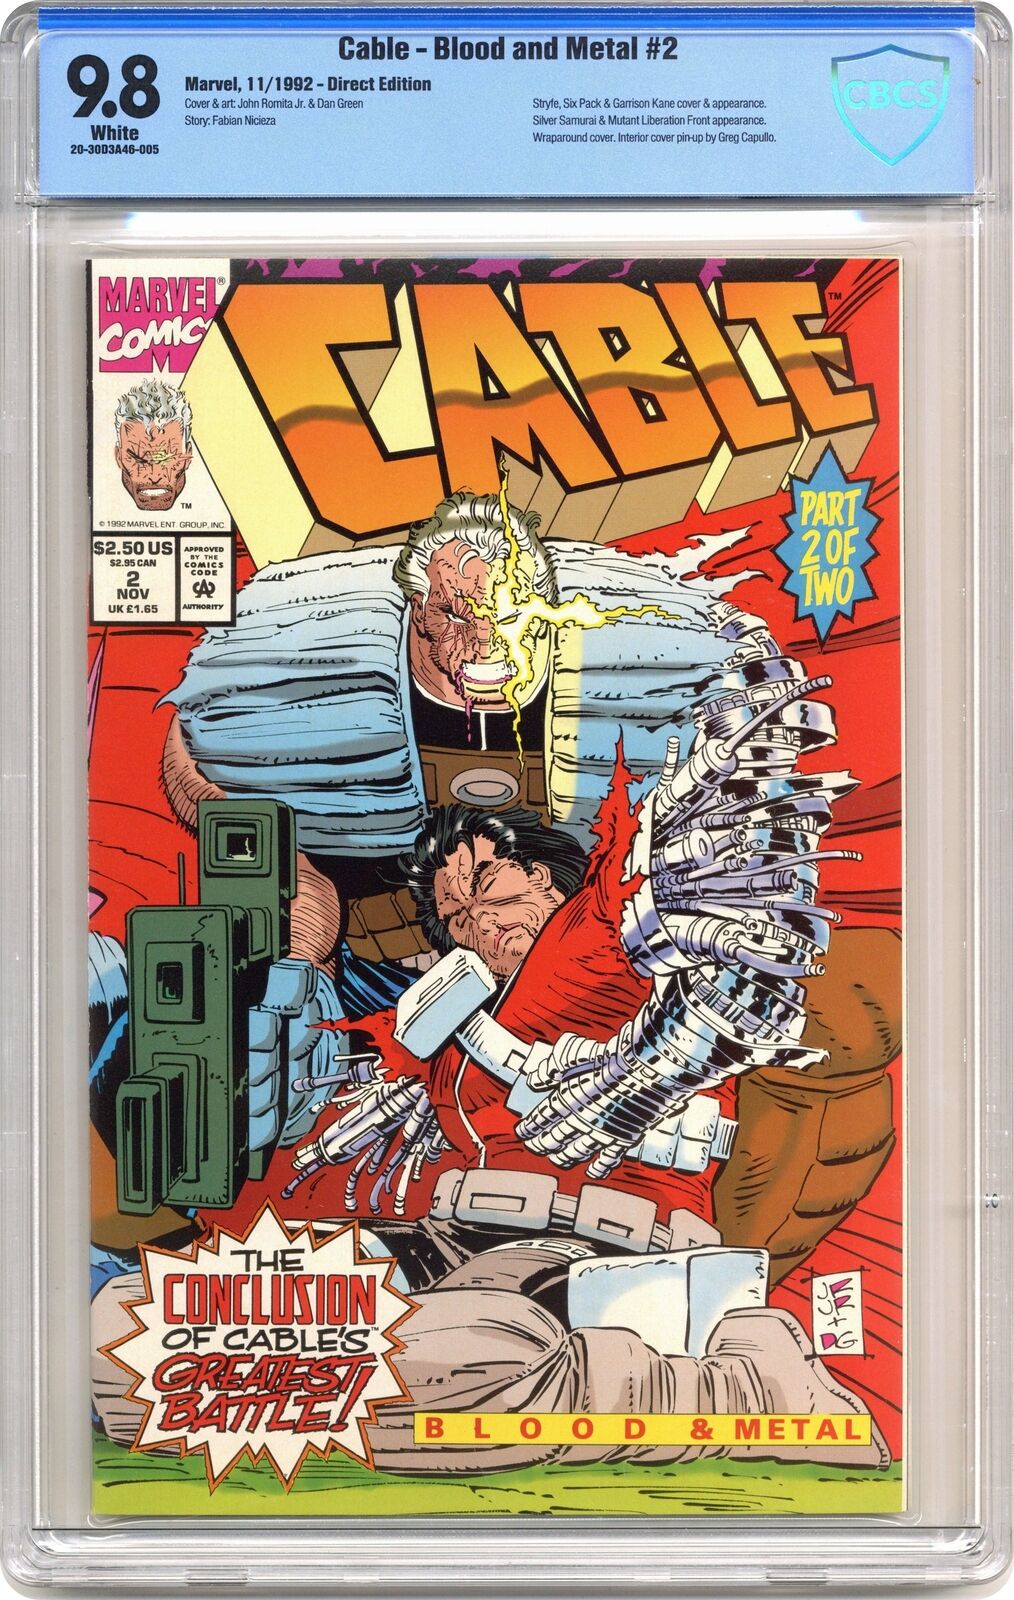 Cable Blood and Metal #2 CBCS 9.8 1992 20-30D3A46-005